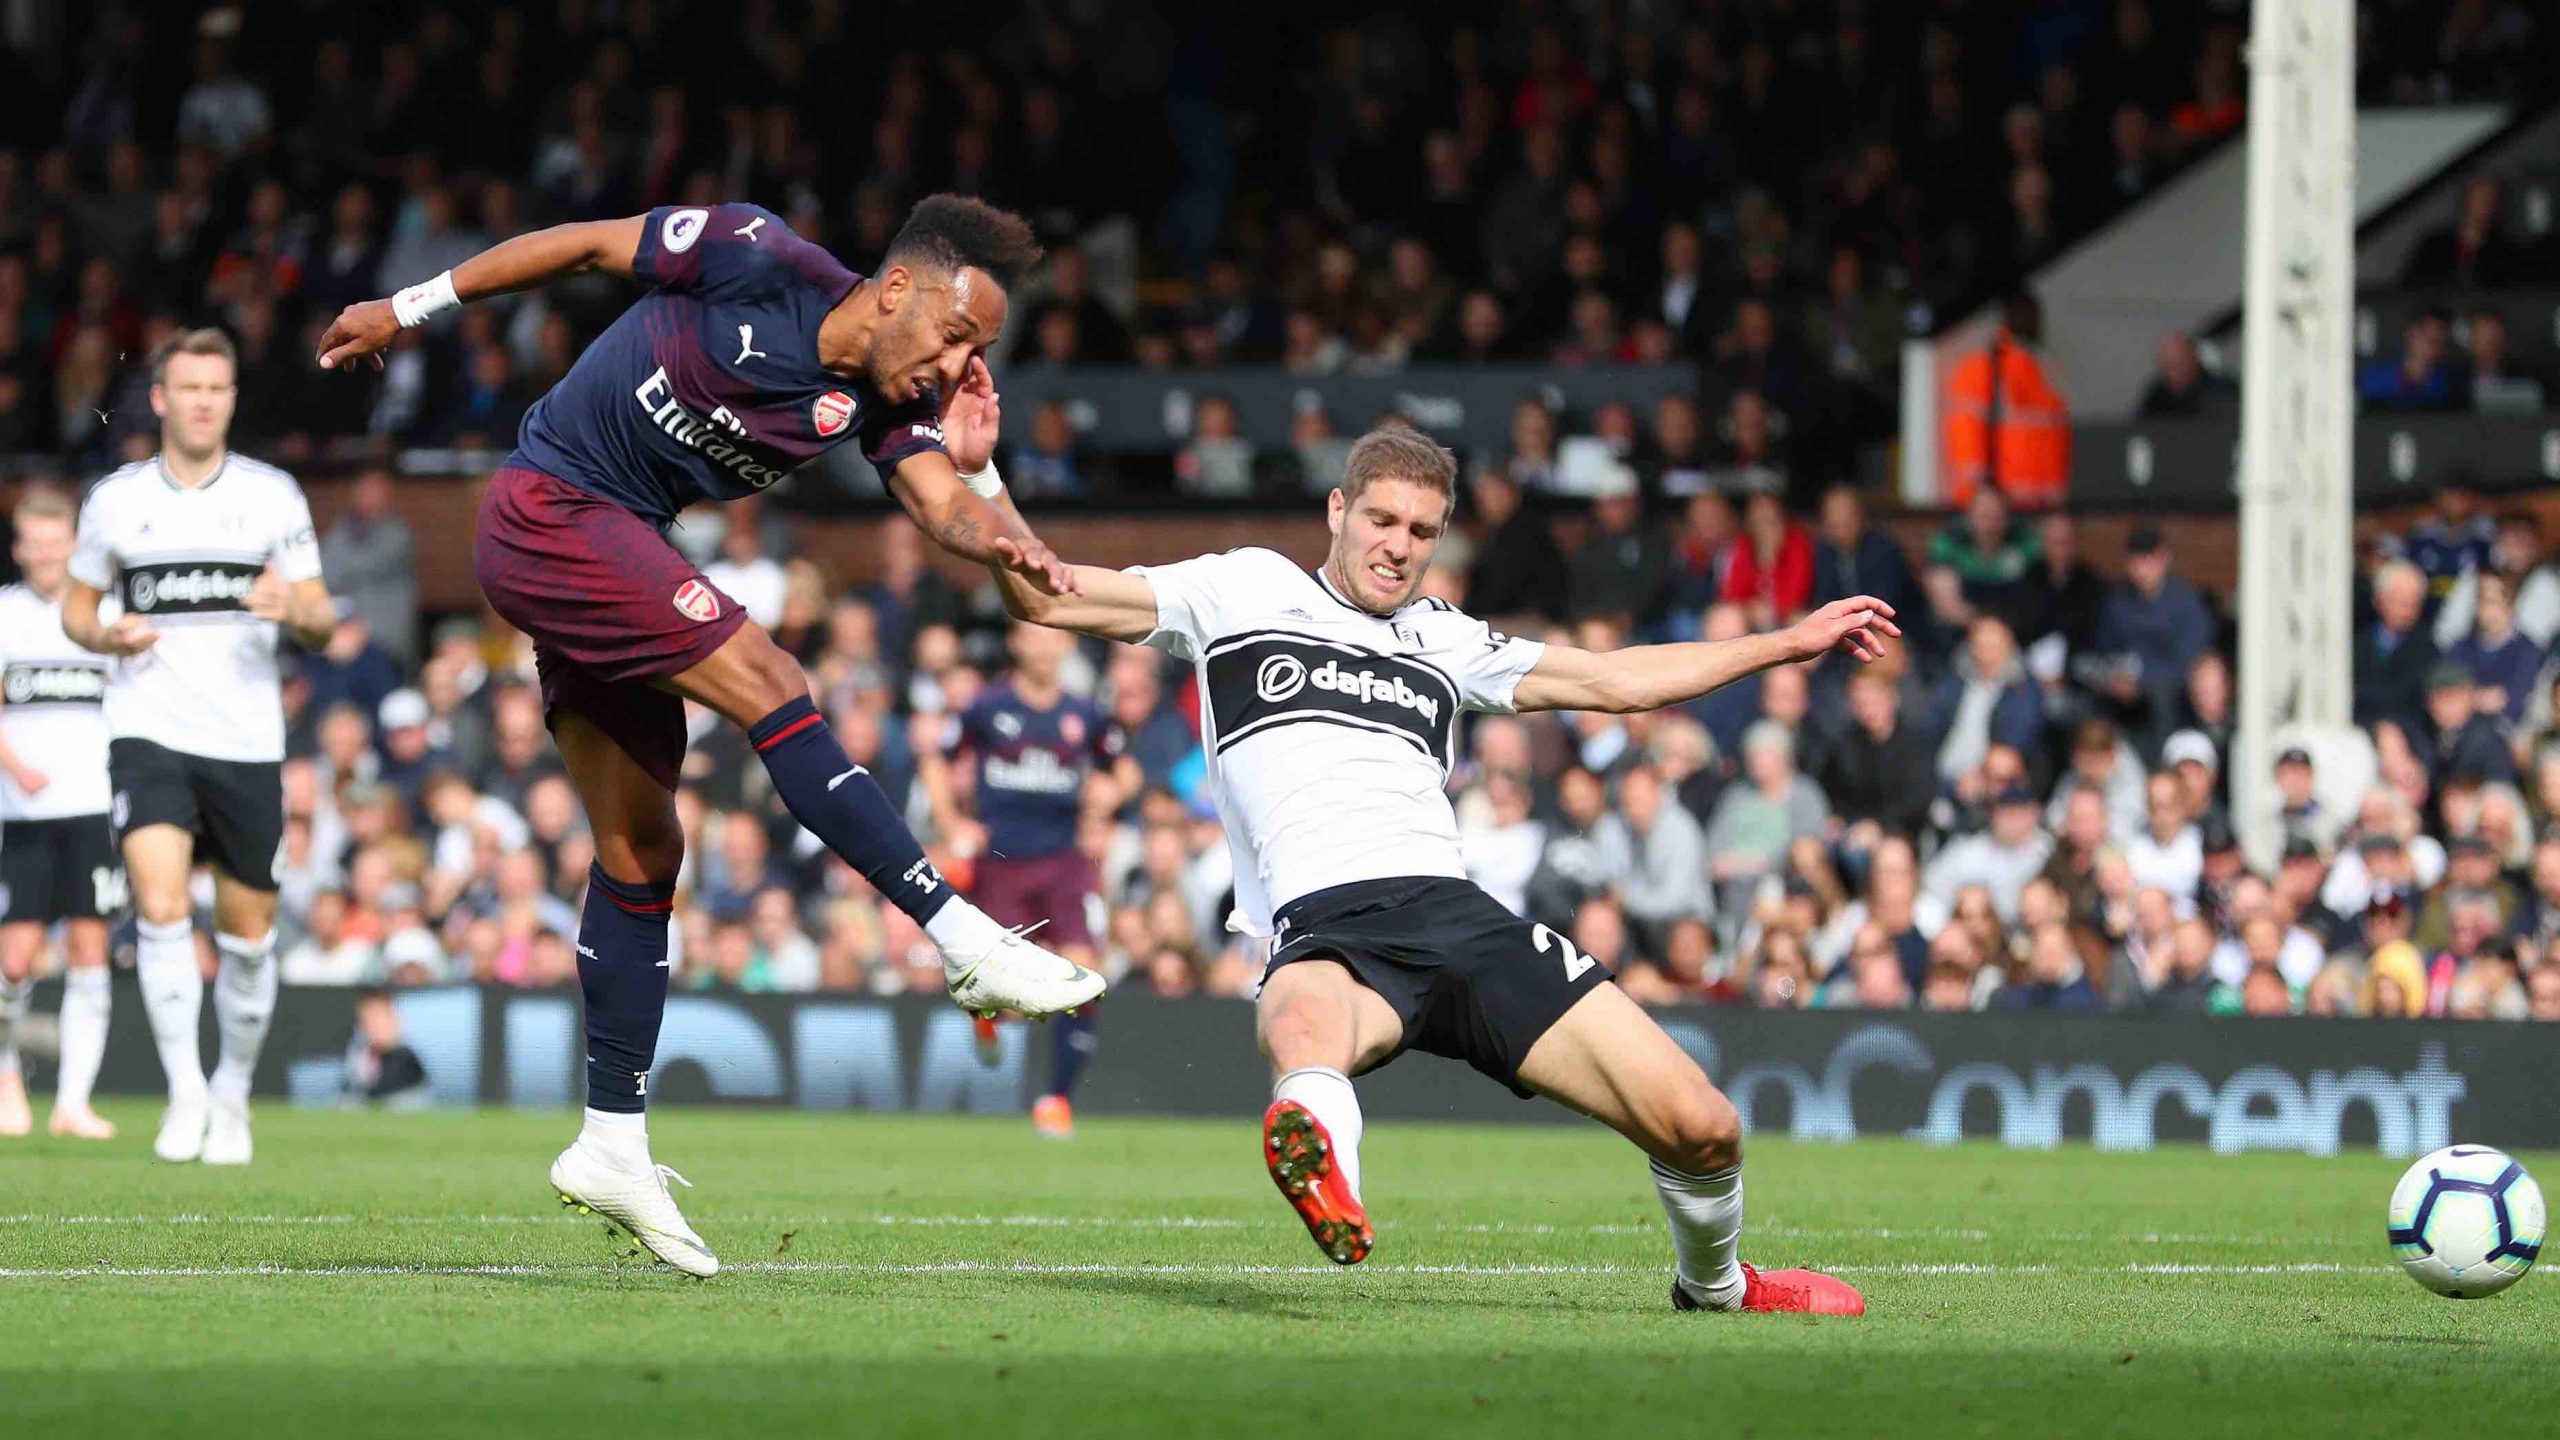 How to watch Fulham vs Arsenal: Live stream Premier League football